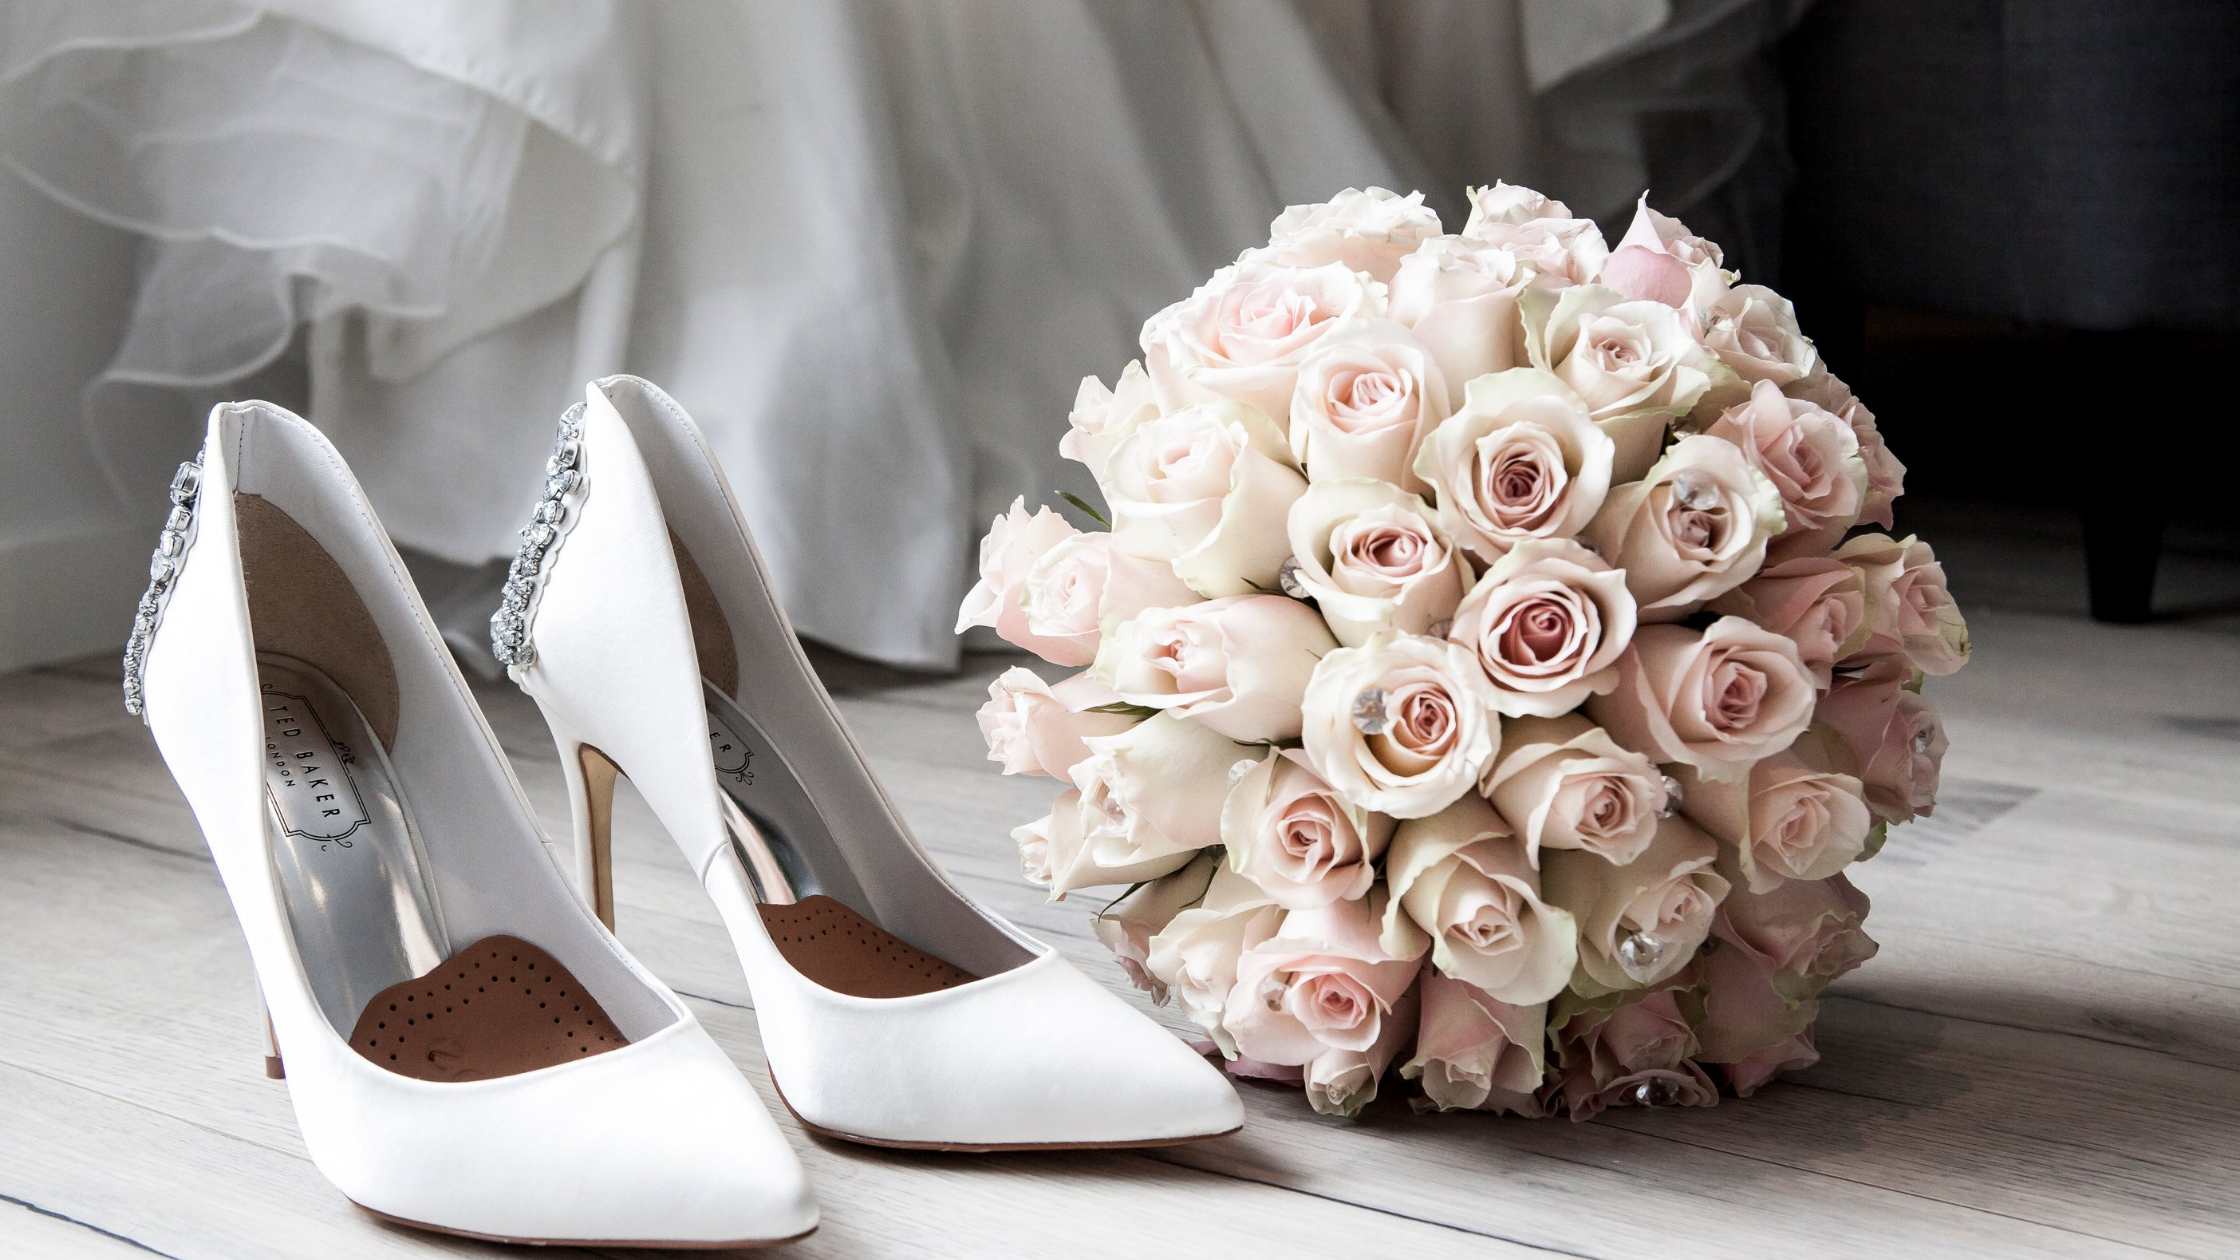 Where to Start First When Planning a Wedding